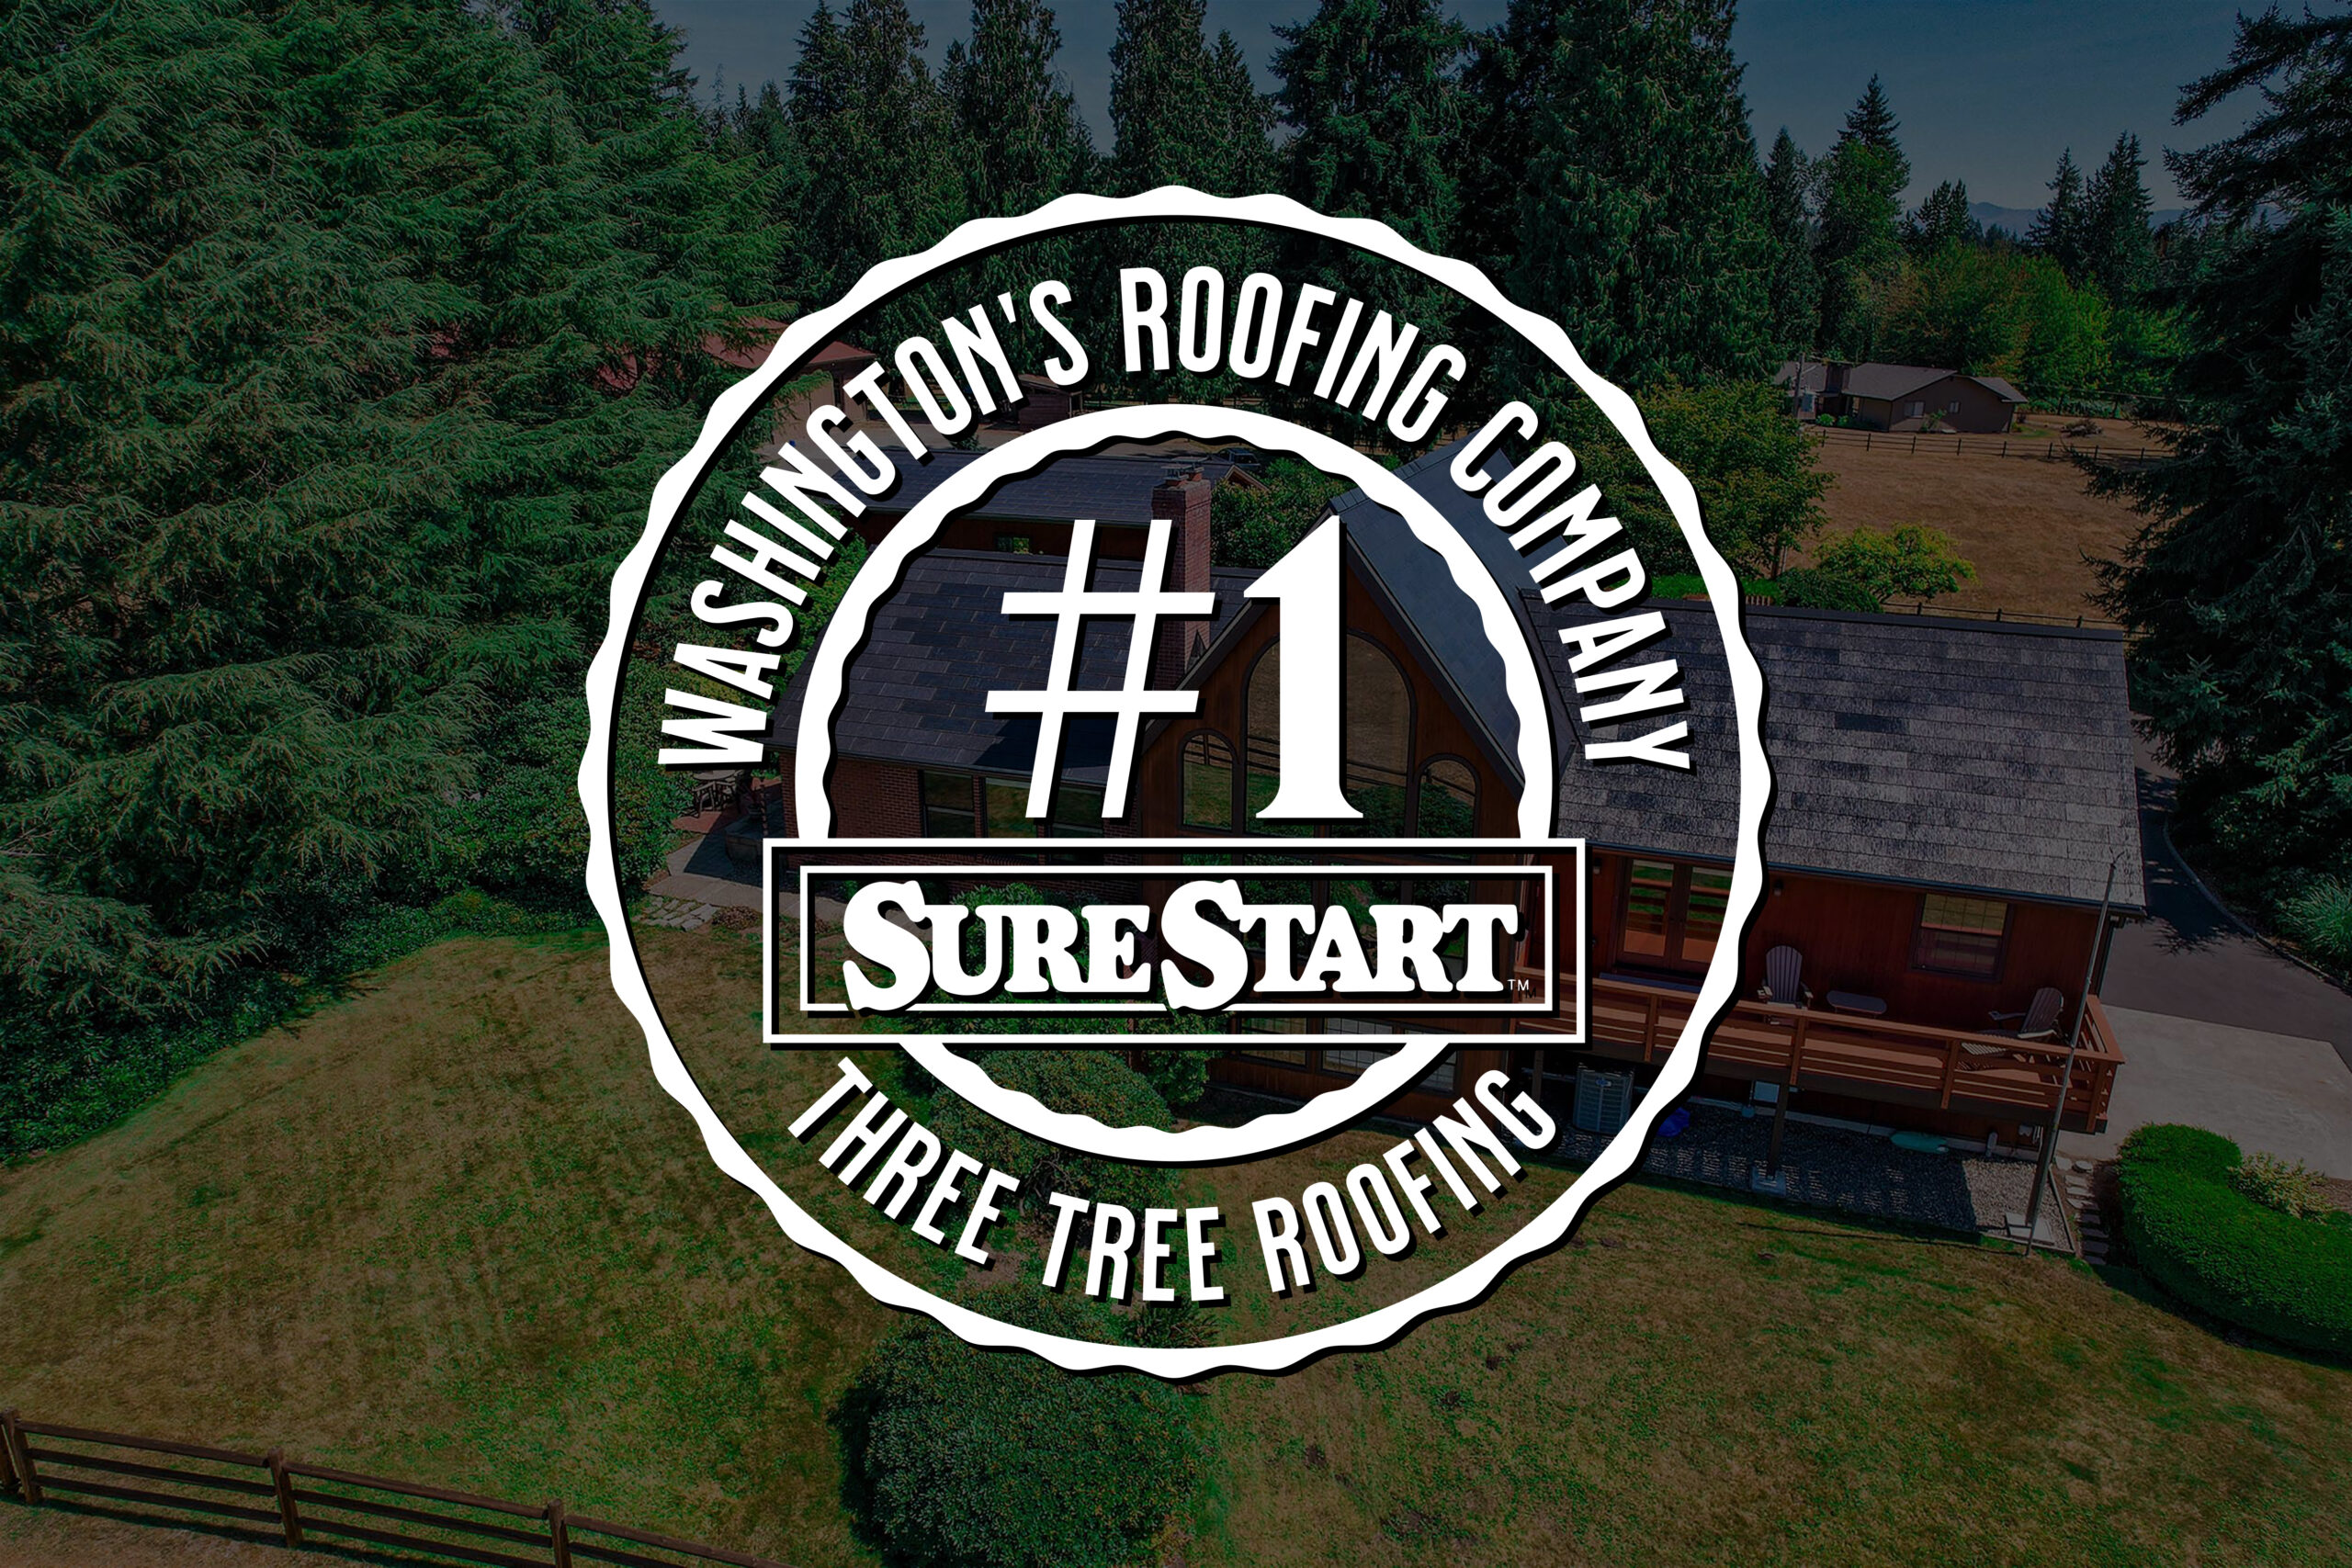 Three Tree Roofing Takes the Title - #1 Roofer in Washington